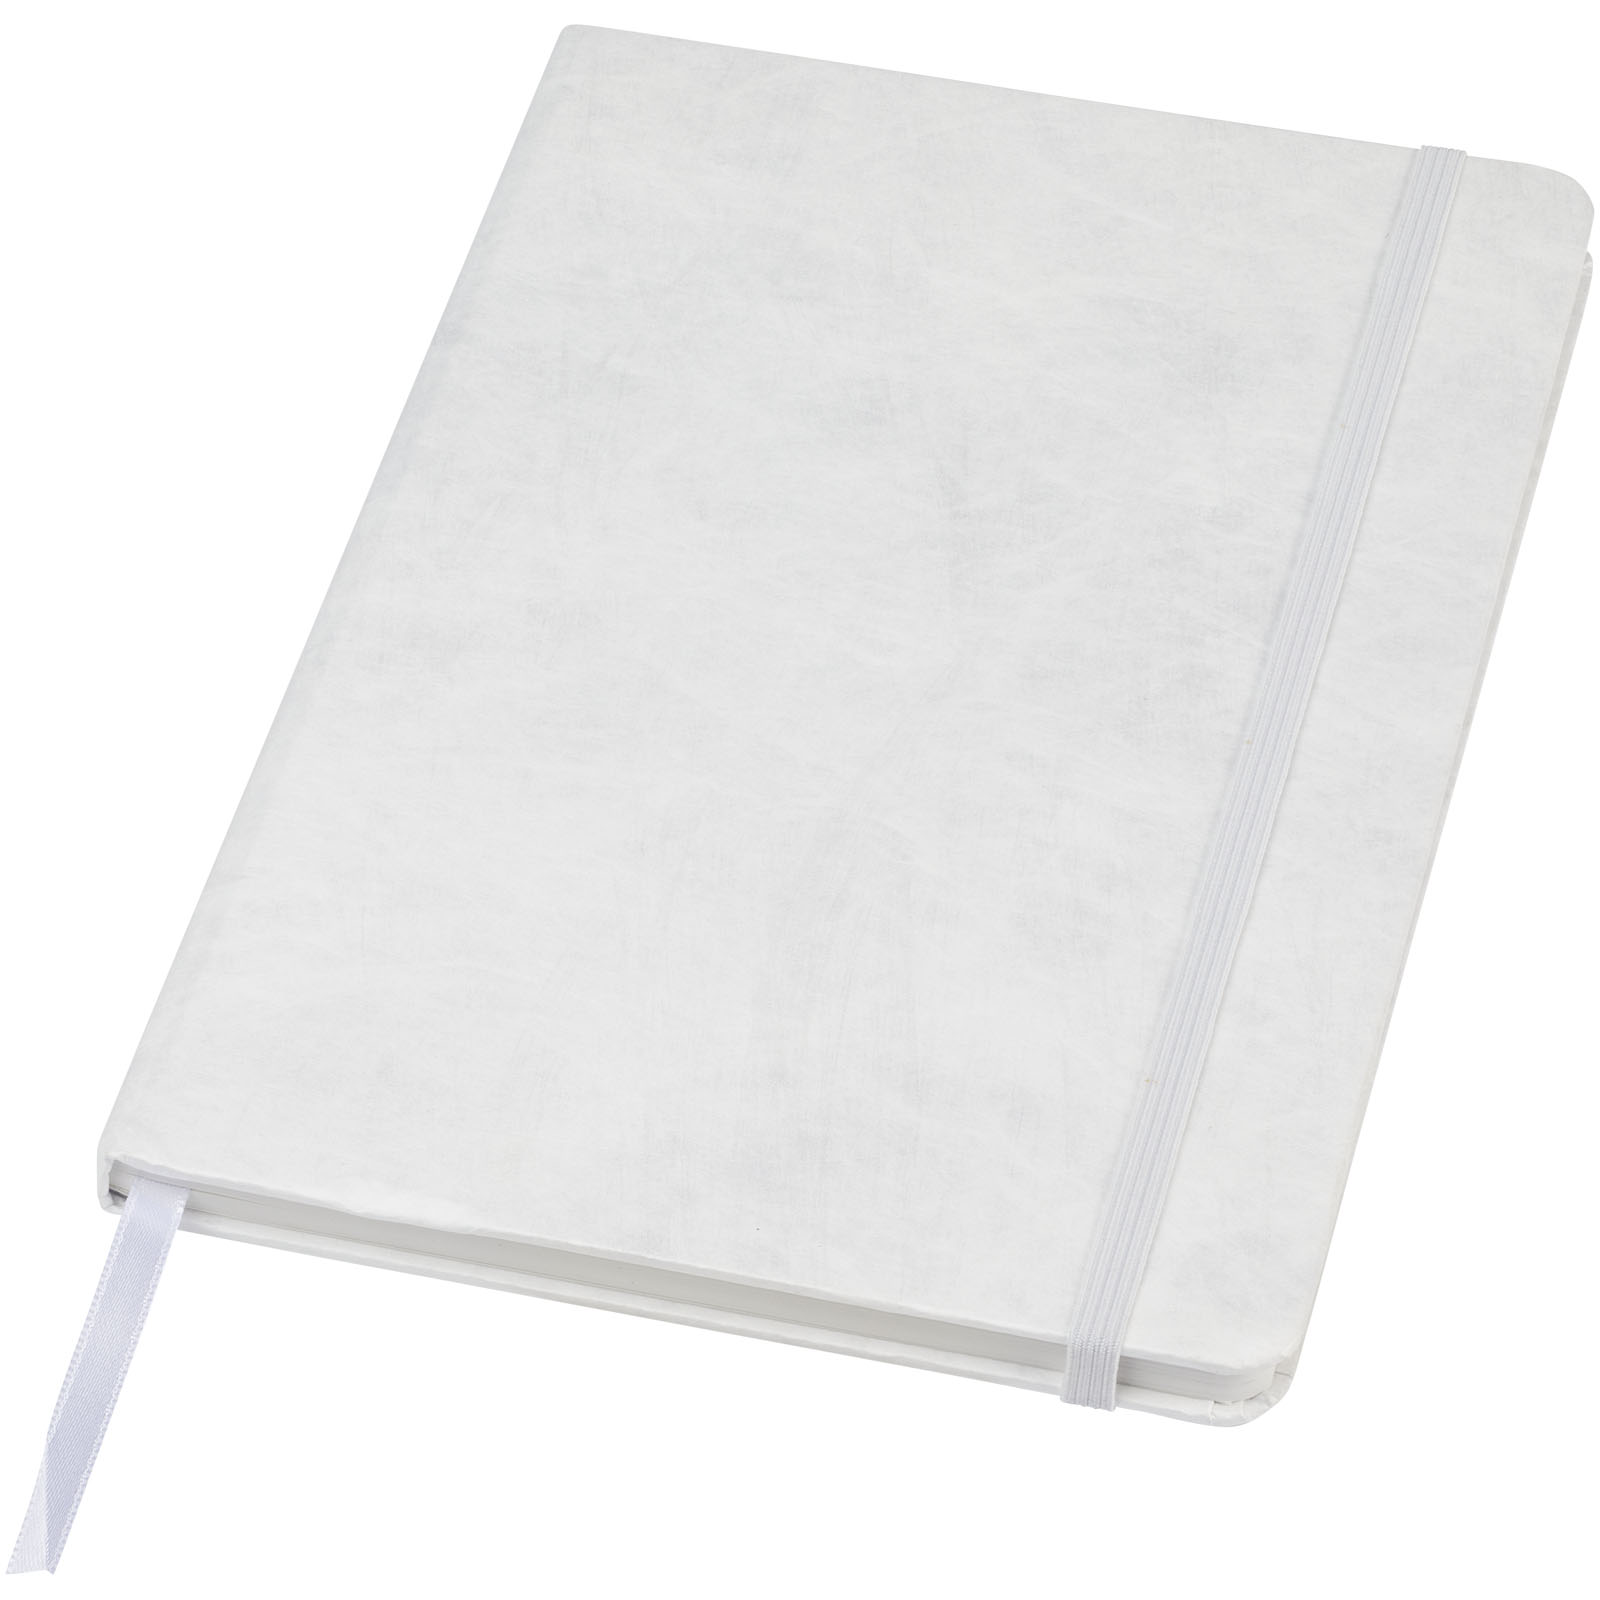 Advertising Hard cover notebooks - Breccia A5 stone paper notebook - 0